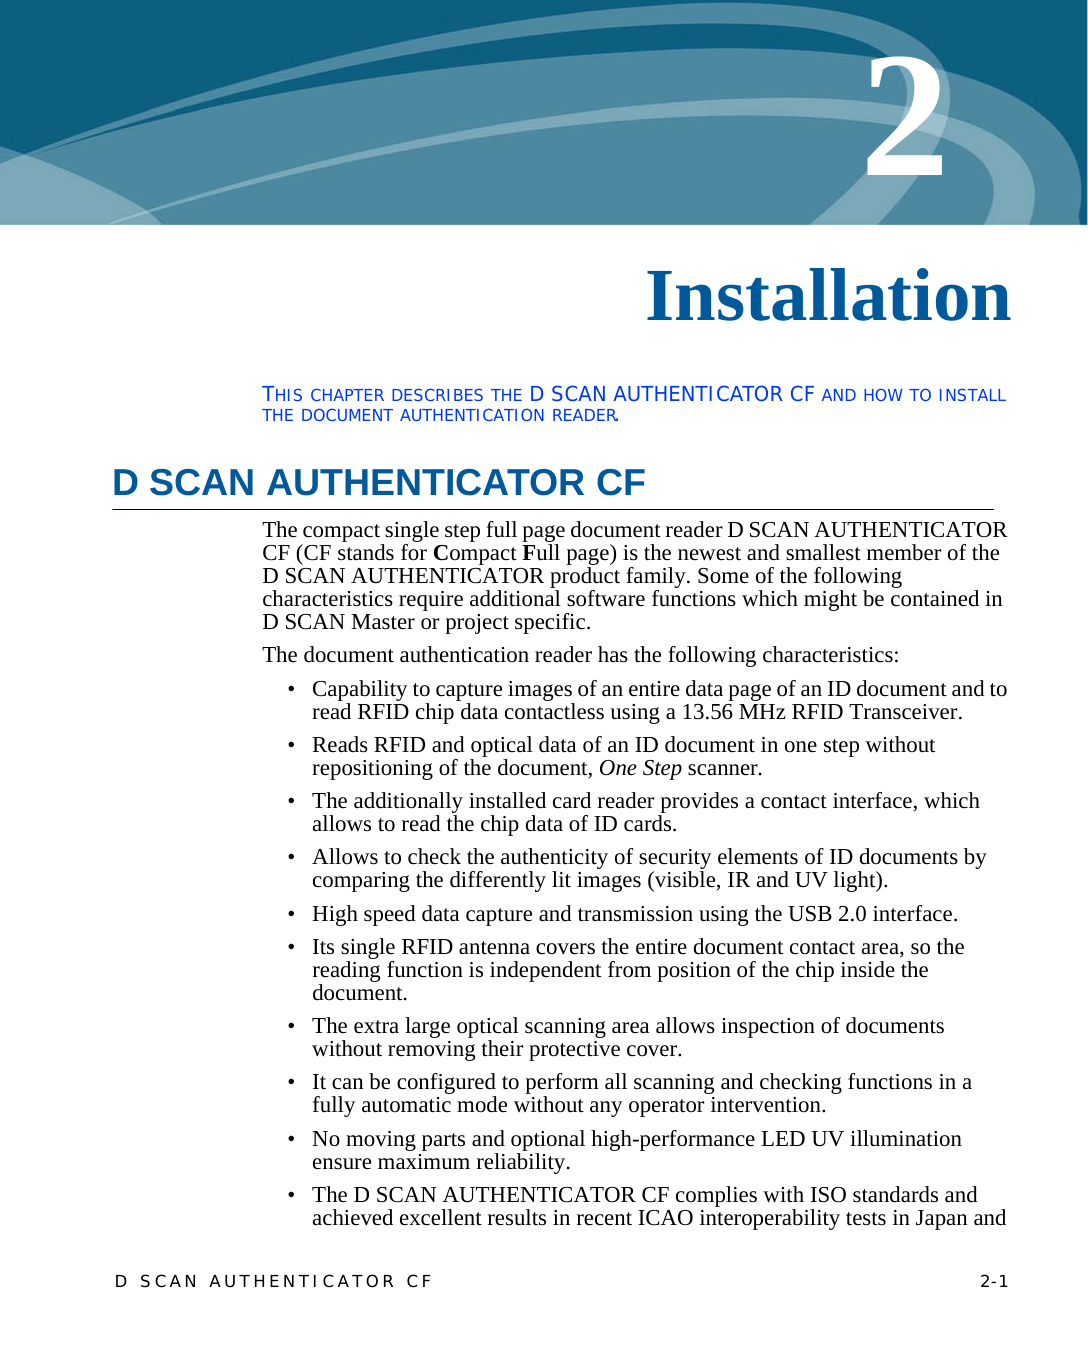 D SCAN AUTHENTICATOR CF    2-12Chapter 0InstallationTHIS CHAPTER DESCRIBES THE D SCAN AUTHENTICATOR CF AND HOW TO INSTALL THE DOCUMENT AUTHENTICATION READER.D SCAN AUTHENTICATOR CFThe compact single step full page document reader D SCAN AUTHENTICATOR CF (CF stands for Compact Full page) is the newest and smallest member of the   D SCAN AUTHENTICATOR product family. Some of the following characteristics require additional software functions which might be contained in D SCAN Master or project specific.The document authentication reader has the following characteristics:• Capability to capture images of an entire data page of an ID document and to read RFID chip data contactless using a 13.56 MHz RFID Transceiver.• Reads RFID and optical data of an ID document in one step without repositioning of the document, One Step scanner.• The additionally installed card reader provides a contact interface, which allows to read the chip data of ID cards.• Allows to check the authenticity of security elements of ID documents by comparing the differently lit images (visible, IR and UV light).• High speed data capture and transmission using the USB 2.0 interface.• Its single RFID antenna covers the entire document contact area, so the reading function is independent from position of the chip inside the document.• The extra large optical scanning area allows inspection of documents without removing their protective cover.• It can be configured to perform all scanning and checking functions in a fully automatic mode without any operator intervention.• No moving parts and optional high-performance LED UV illumination ensure maximum reliability.• The D SCAN AUTHENTICATOR CF complies with ISO standards and achieved excellent results in recent ICAO interoperability tests in Japan and 